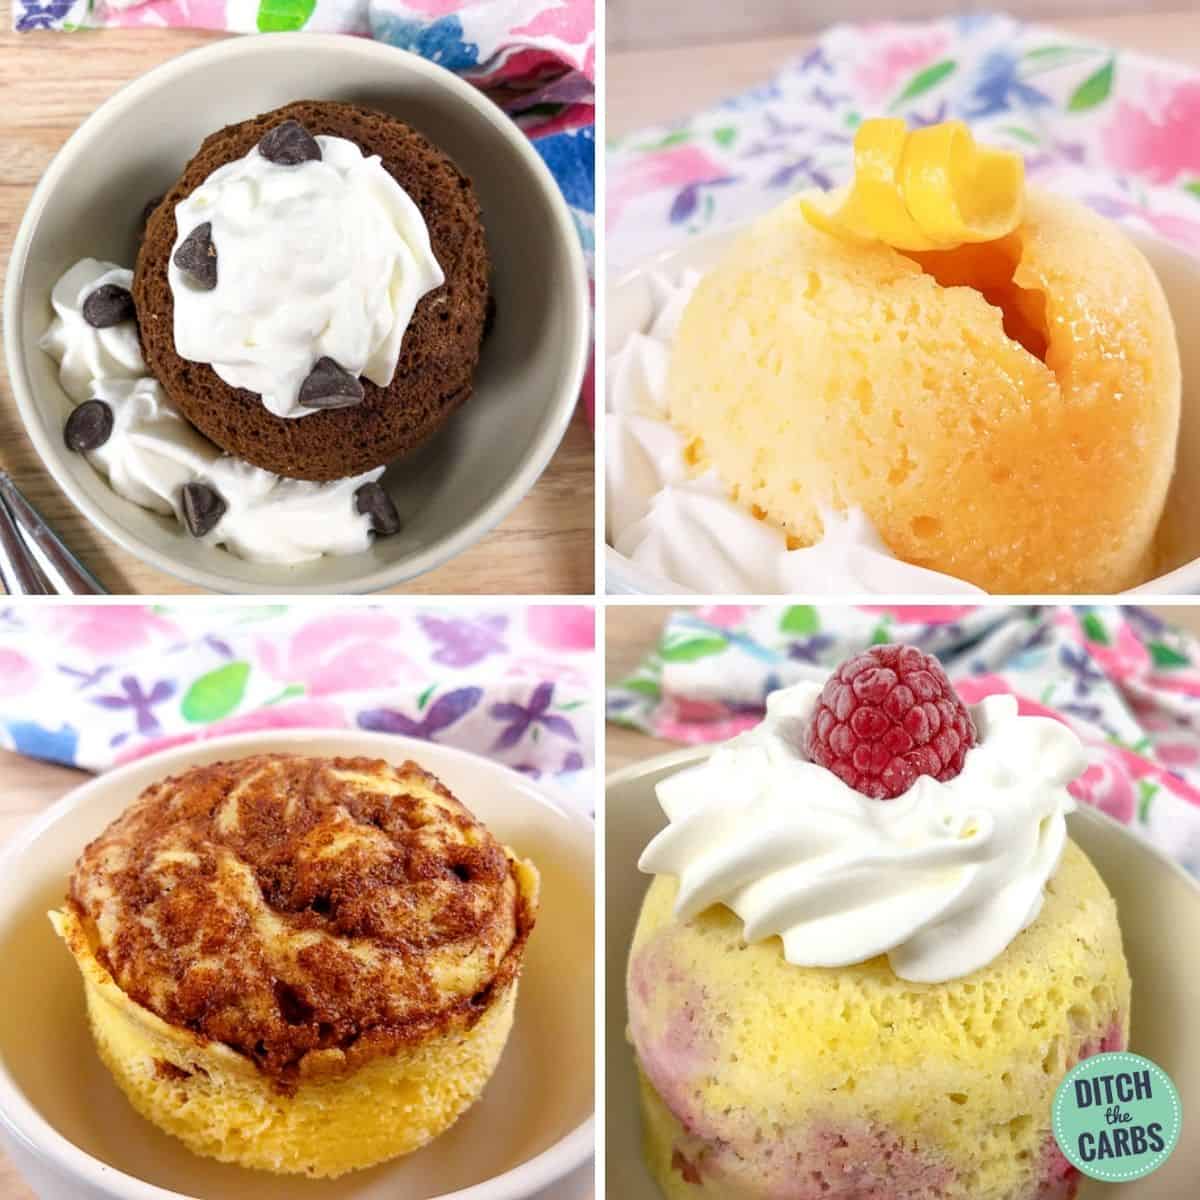 Four different low-carb mug cakes in bowls on a table with forks.